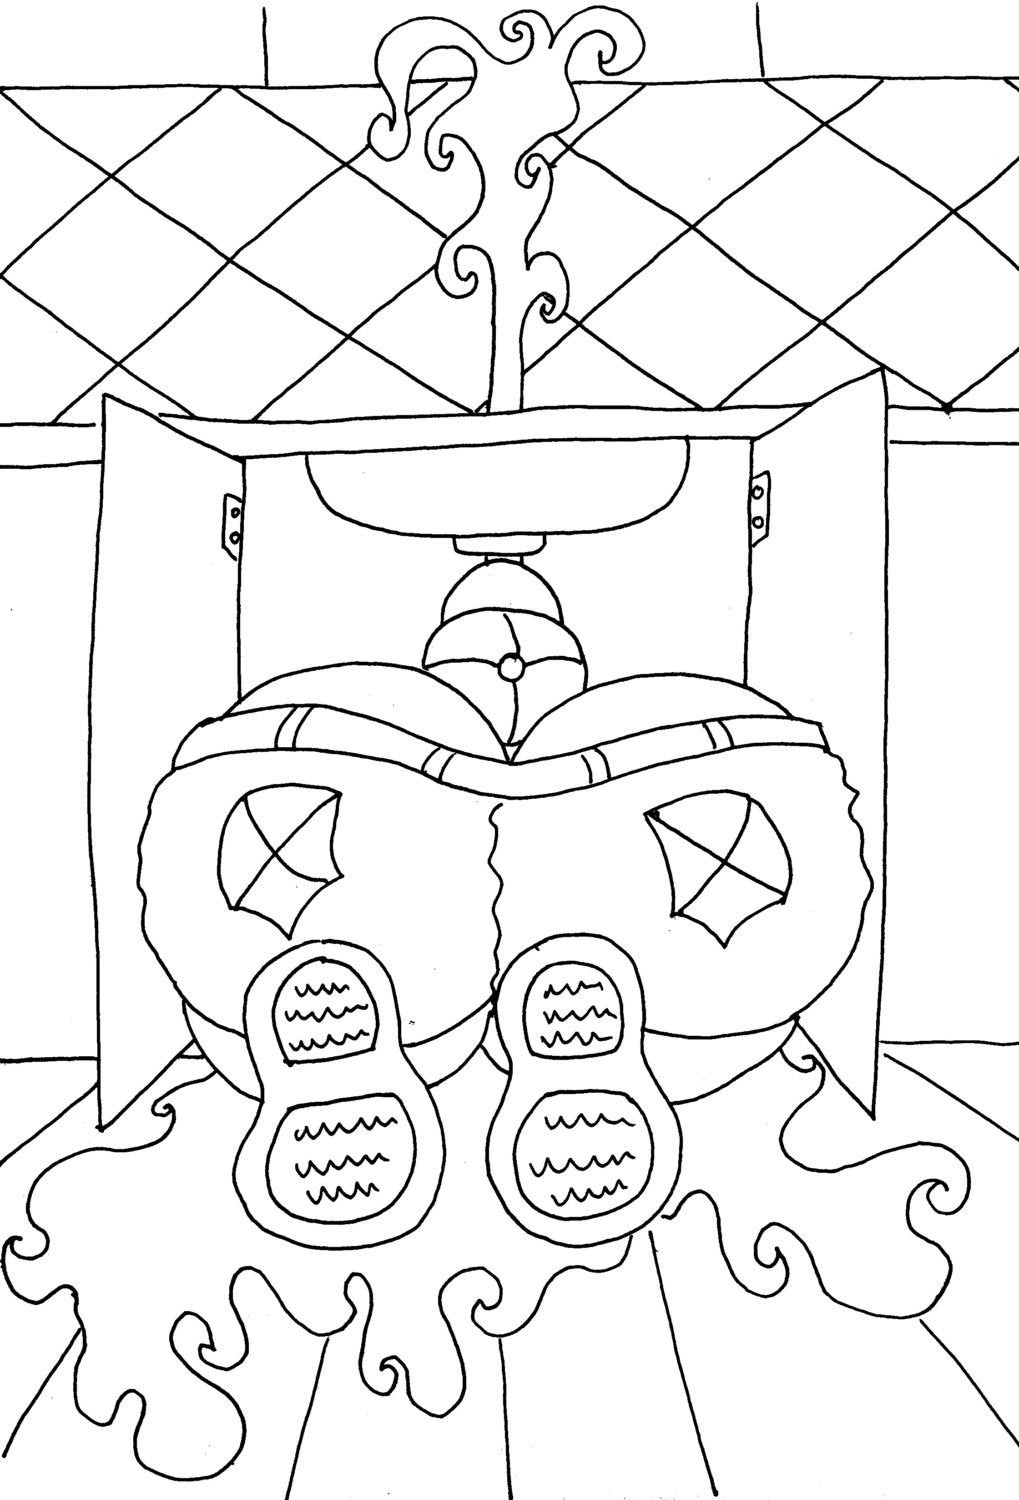 Funny Adult Coloring Pages
 Plumber Butt Funny Adult Coloring Page from Chubby Art